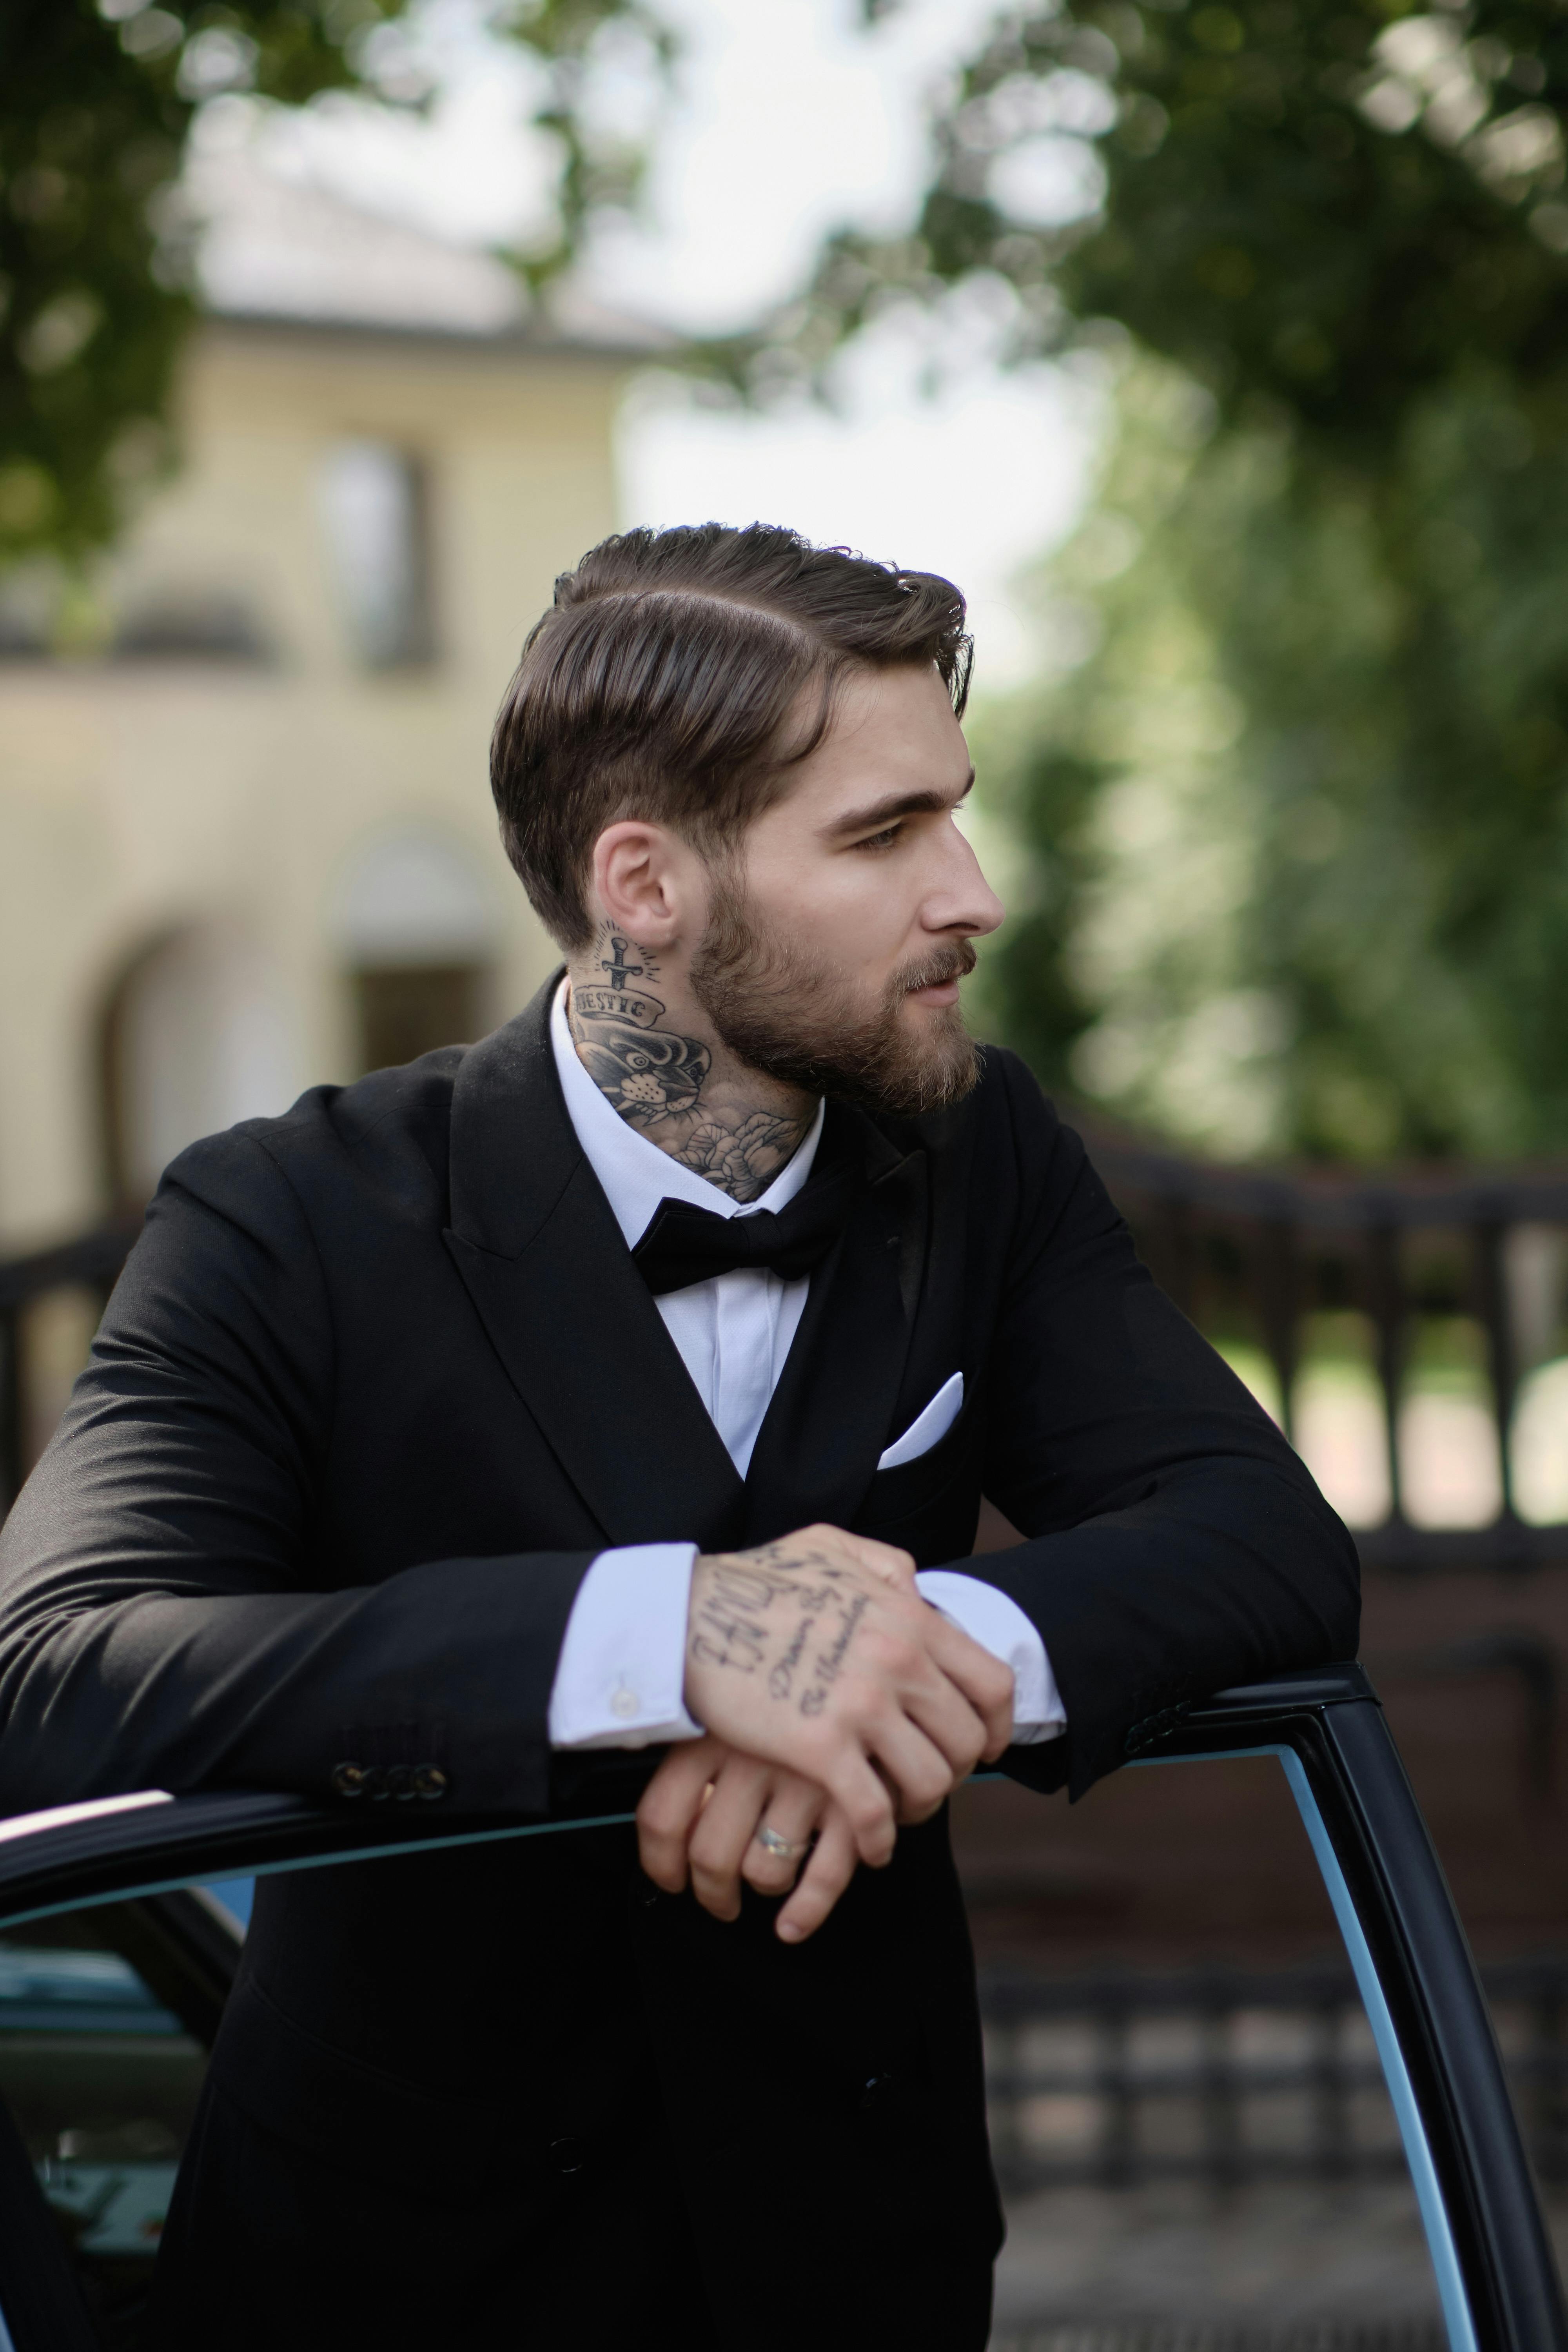 Tattooed Man in a Suit · Free Stock Photo